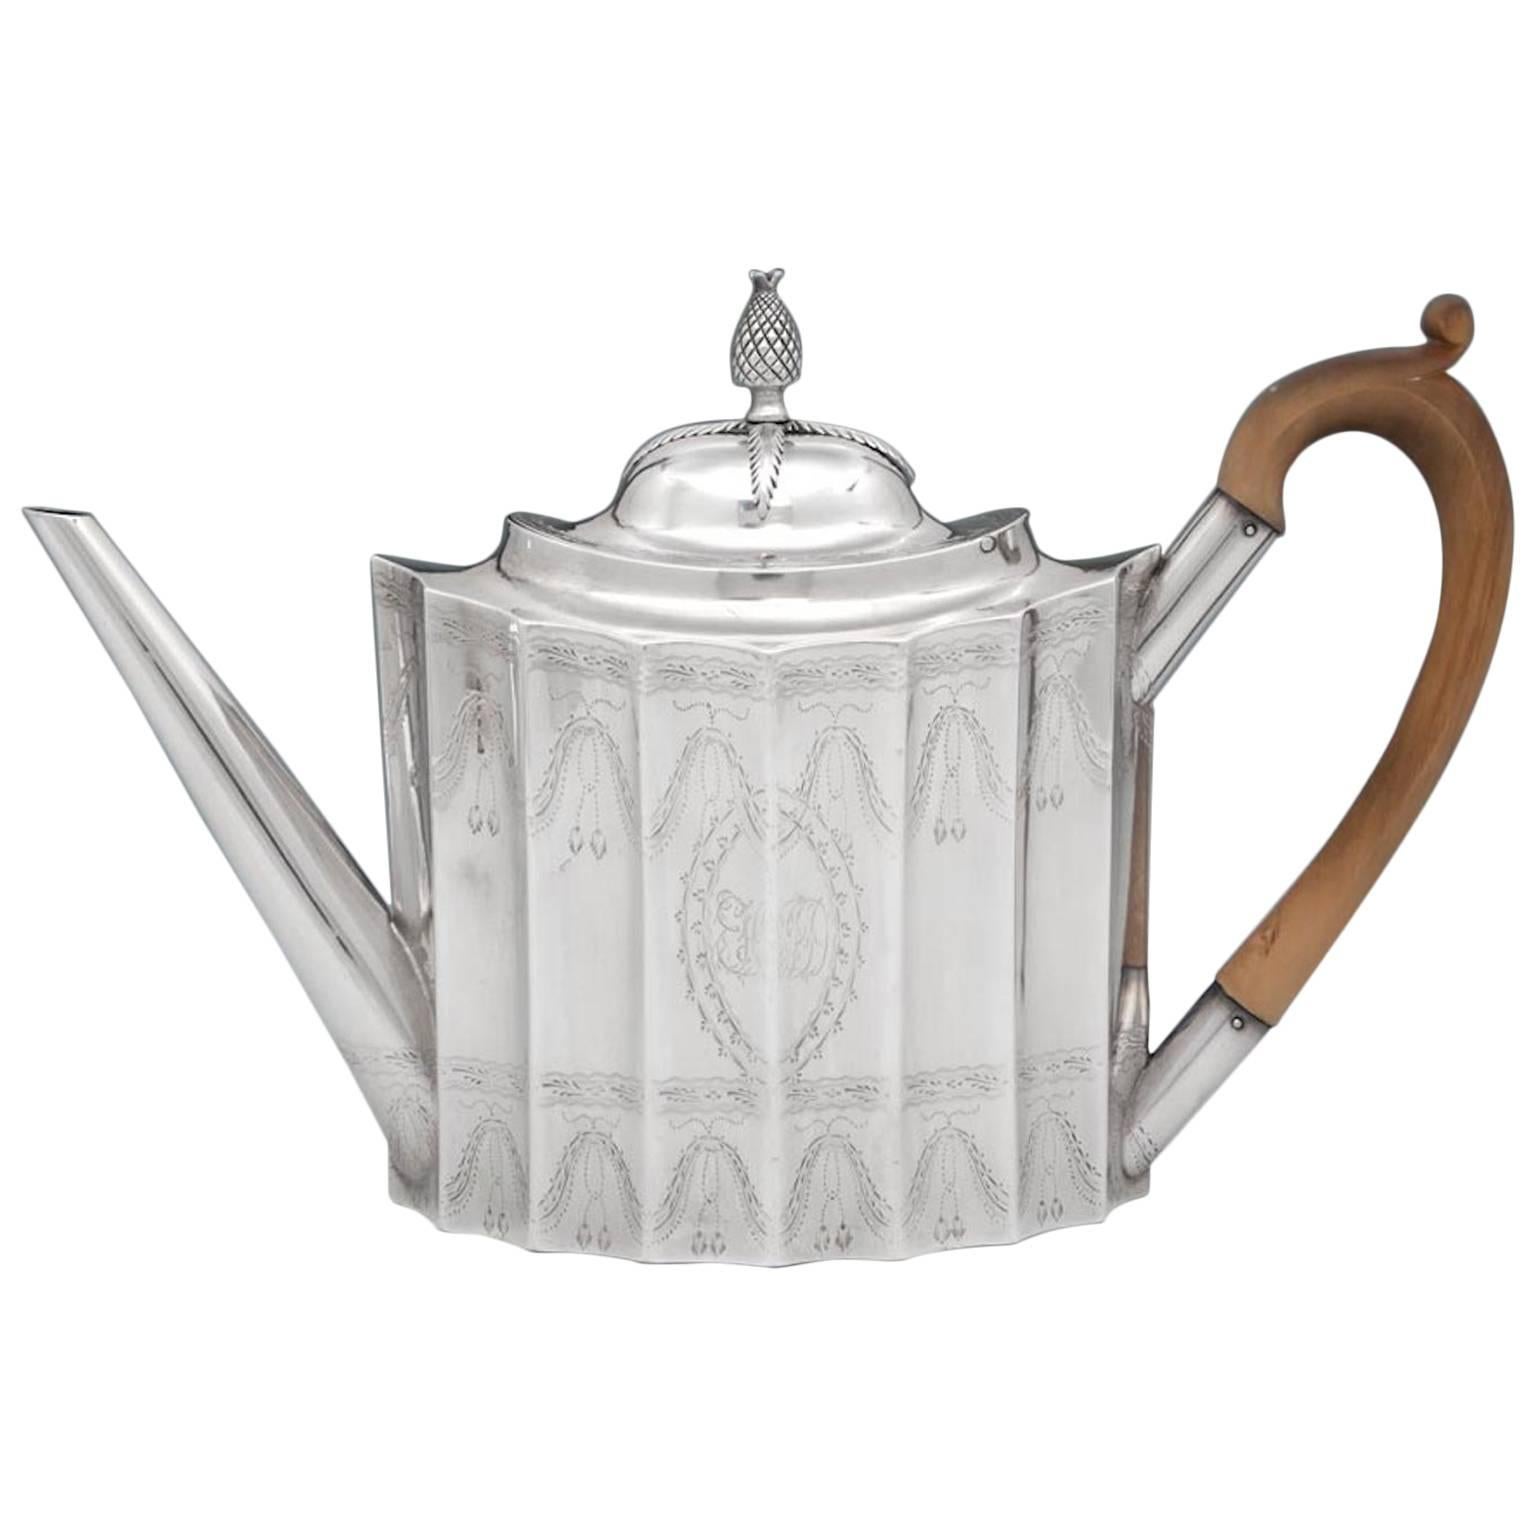 Early American Silver Teapot